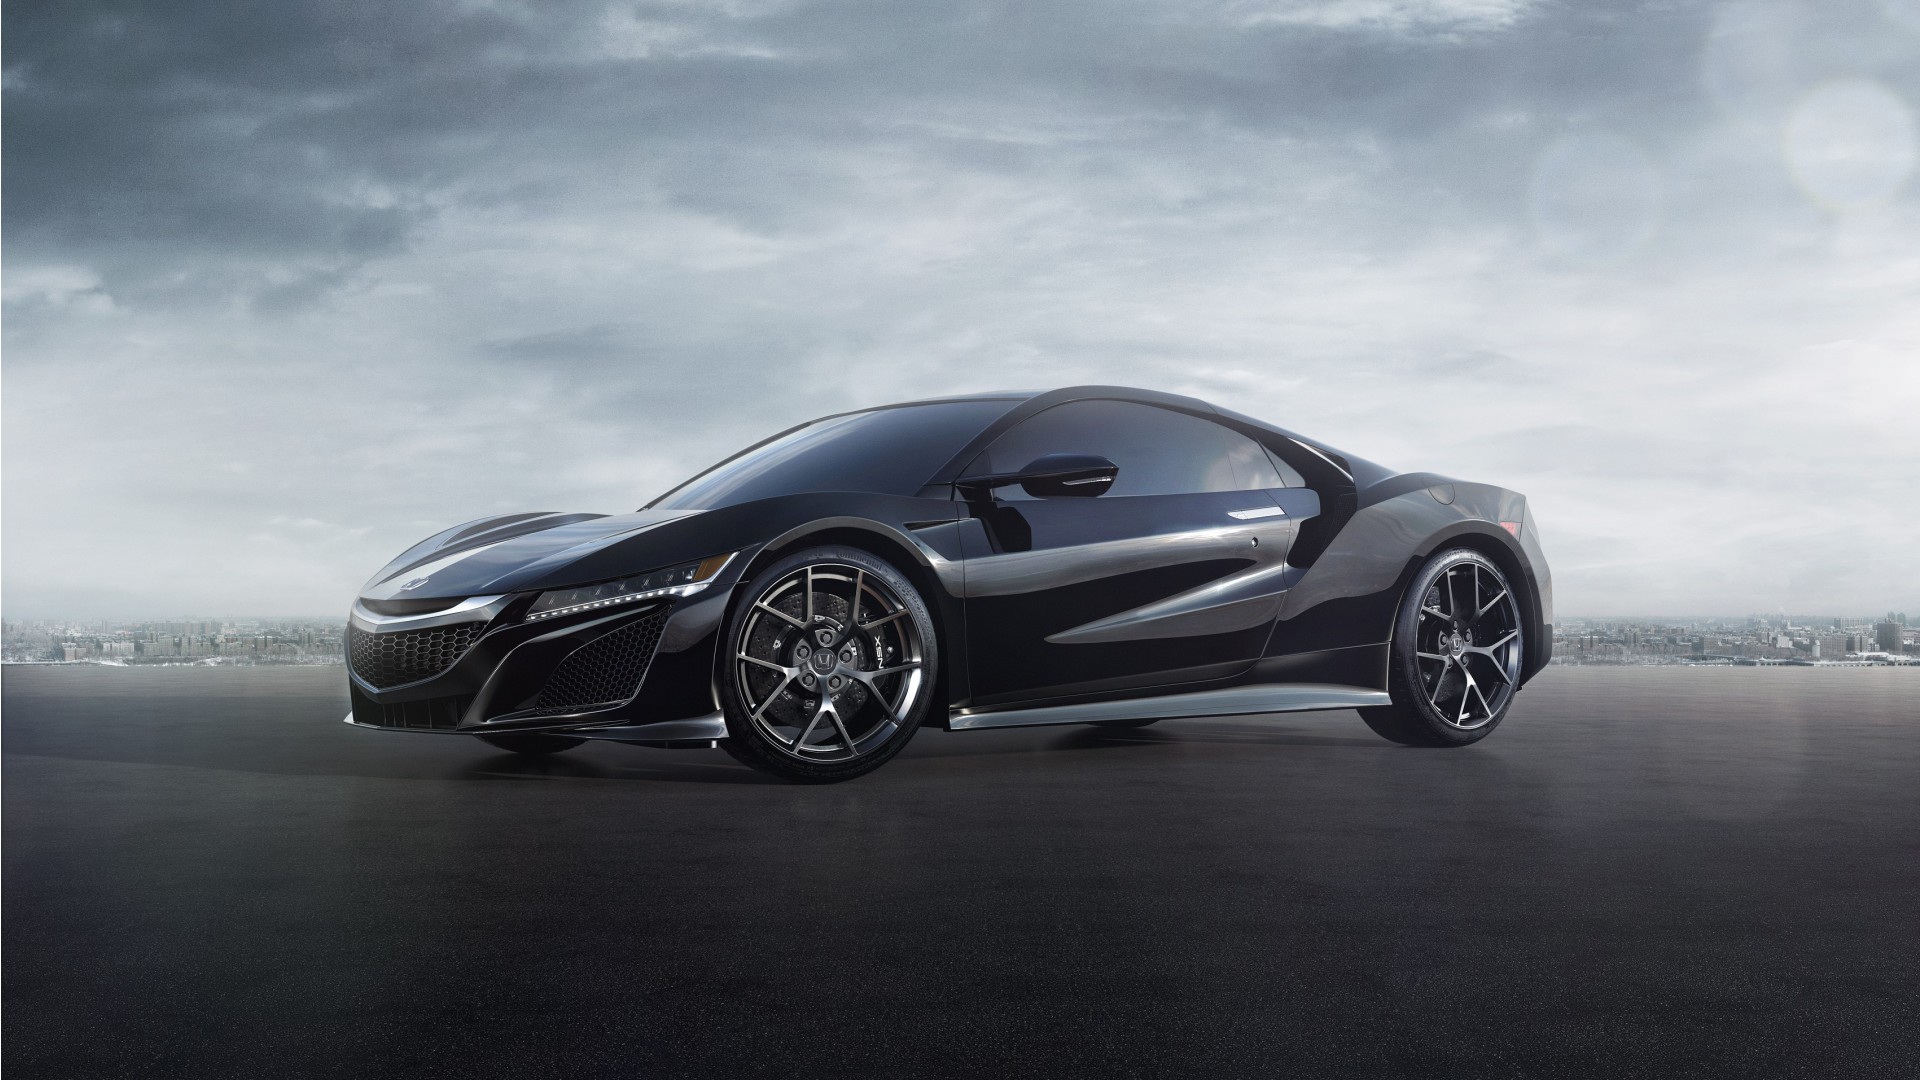 It’s not a luxury or sports car, so it might come as a surprise that the honda accord is also the most stolen car in the united states. Honda NSX 2018 Wallpaper | HD Car Wallpapers | ID #9123